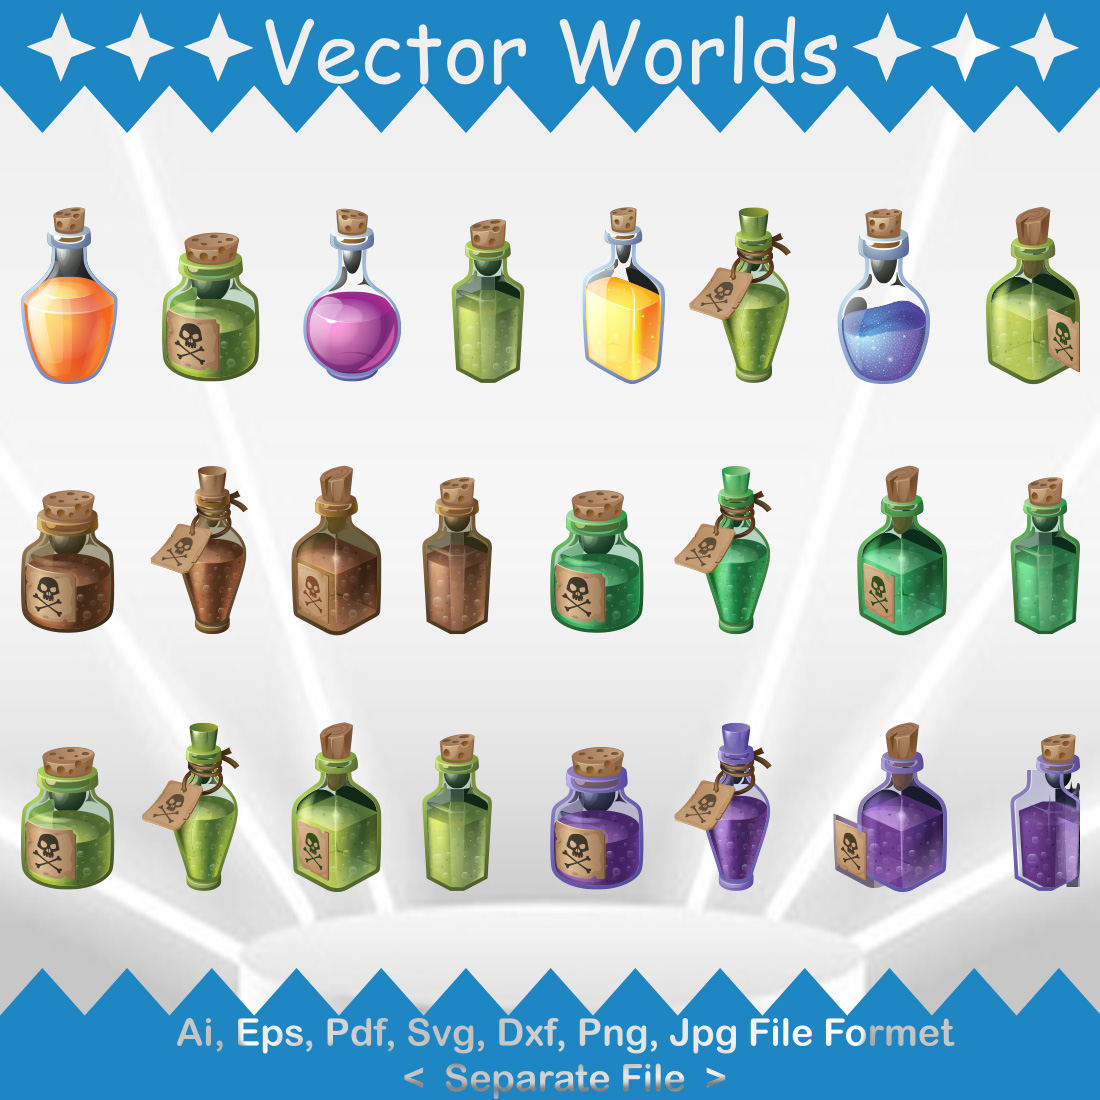 Colored Magic Potion Bottle | Poster